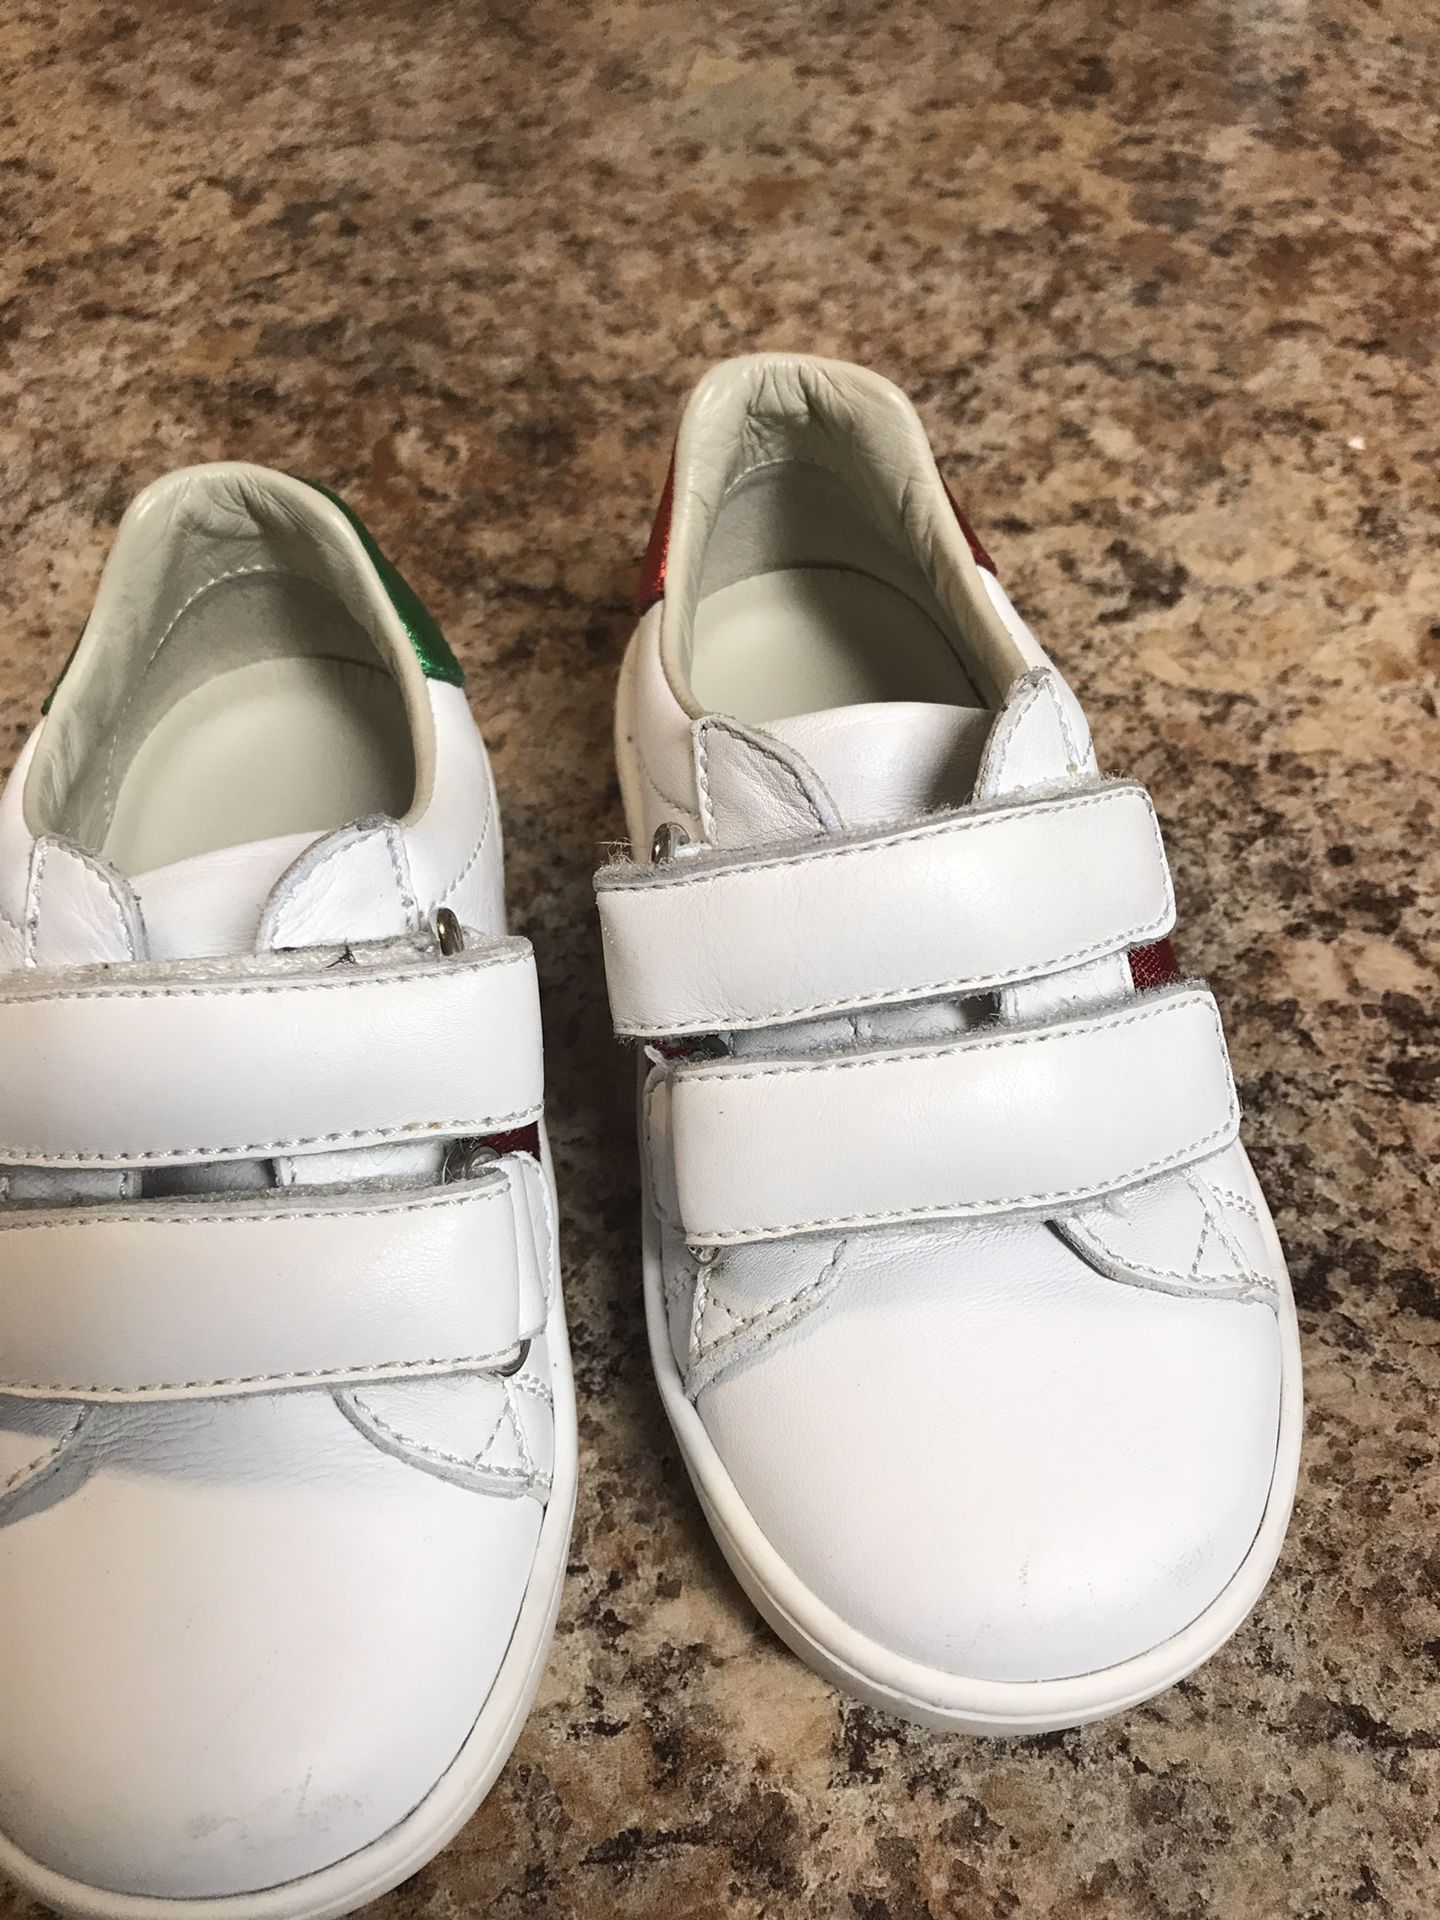 Gucci toddler shoes size 22